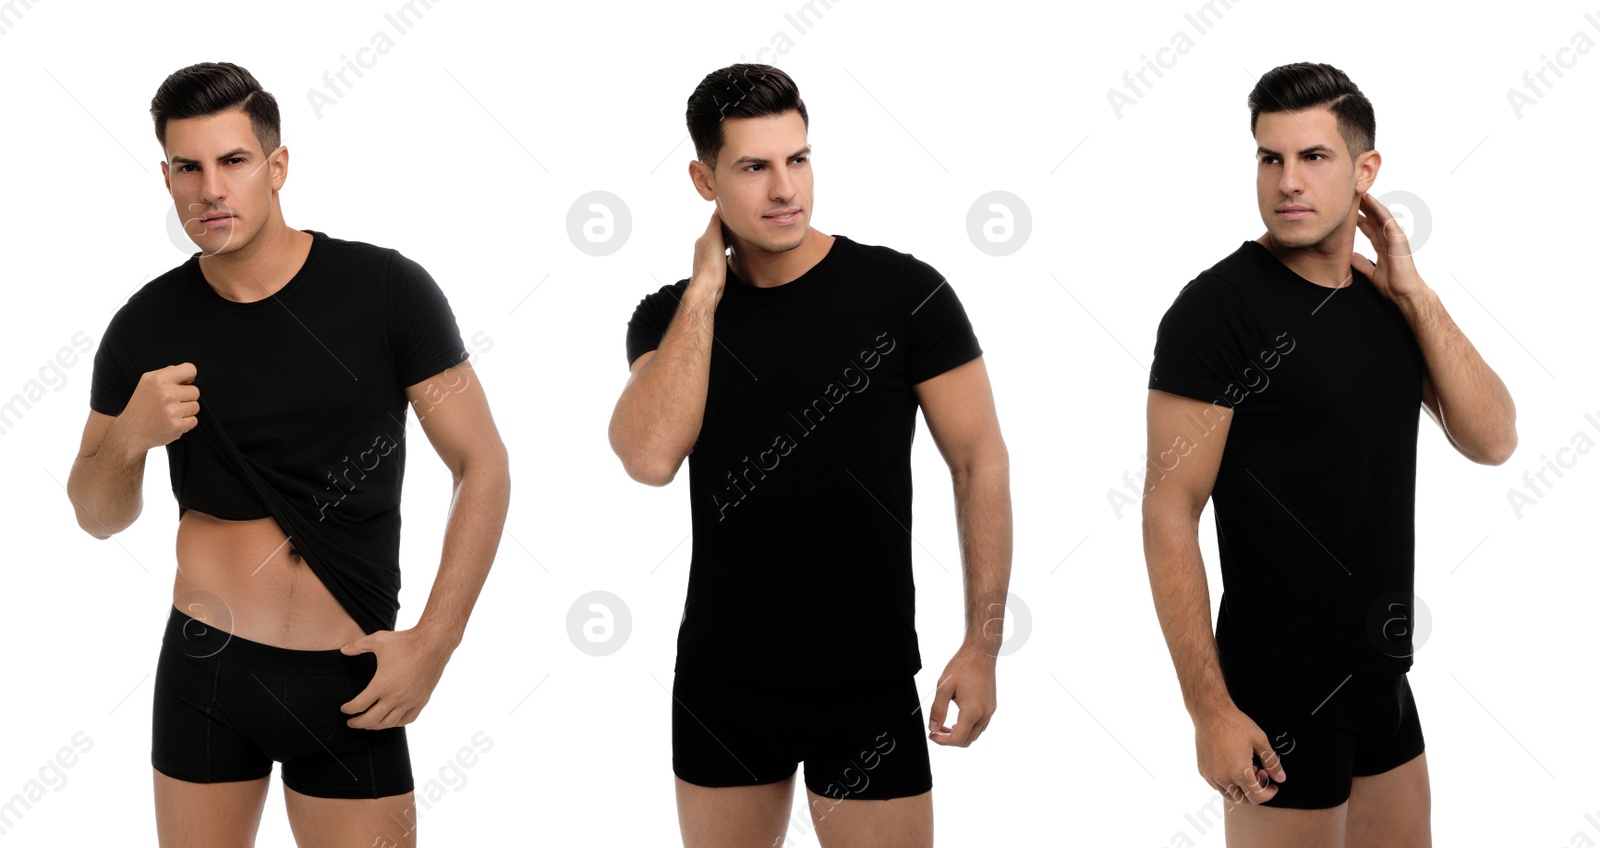 Image of Collage of man in underwear and t-shirt on white background